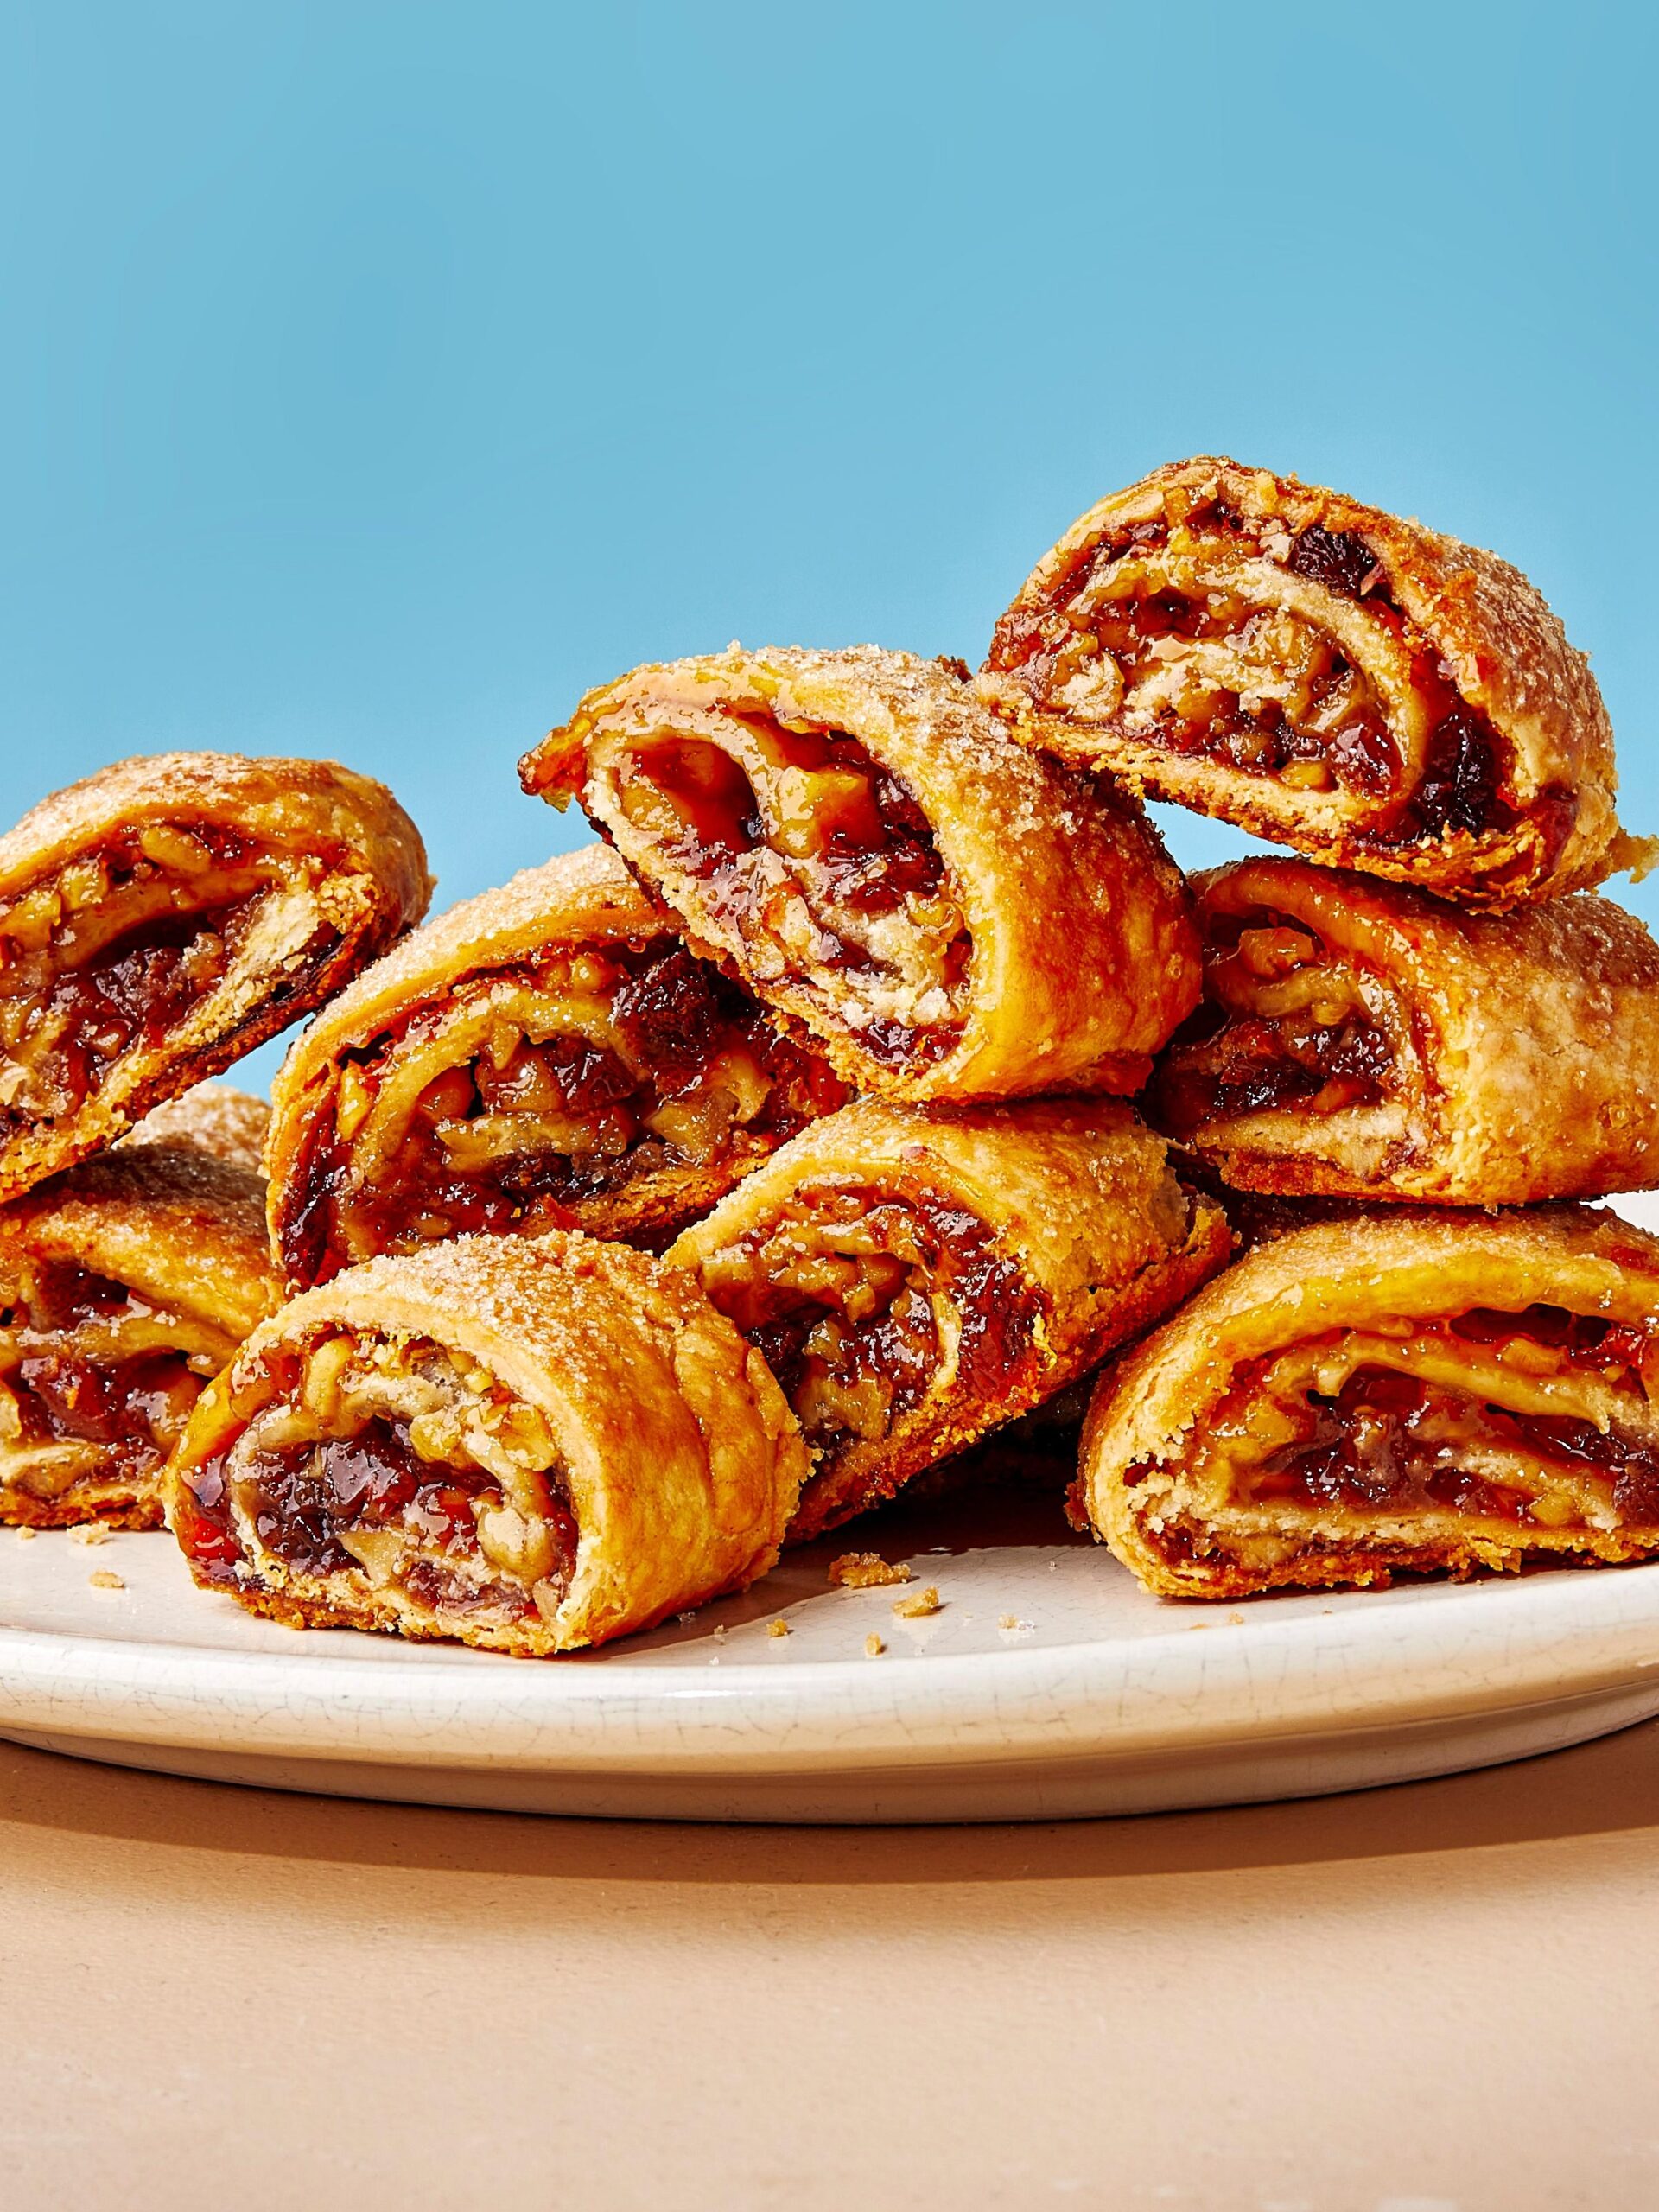  The scent of the cinnamon and nutmeg filling is hard to resist.